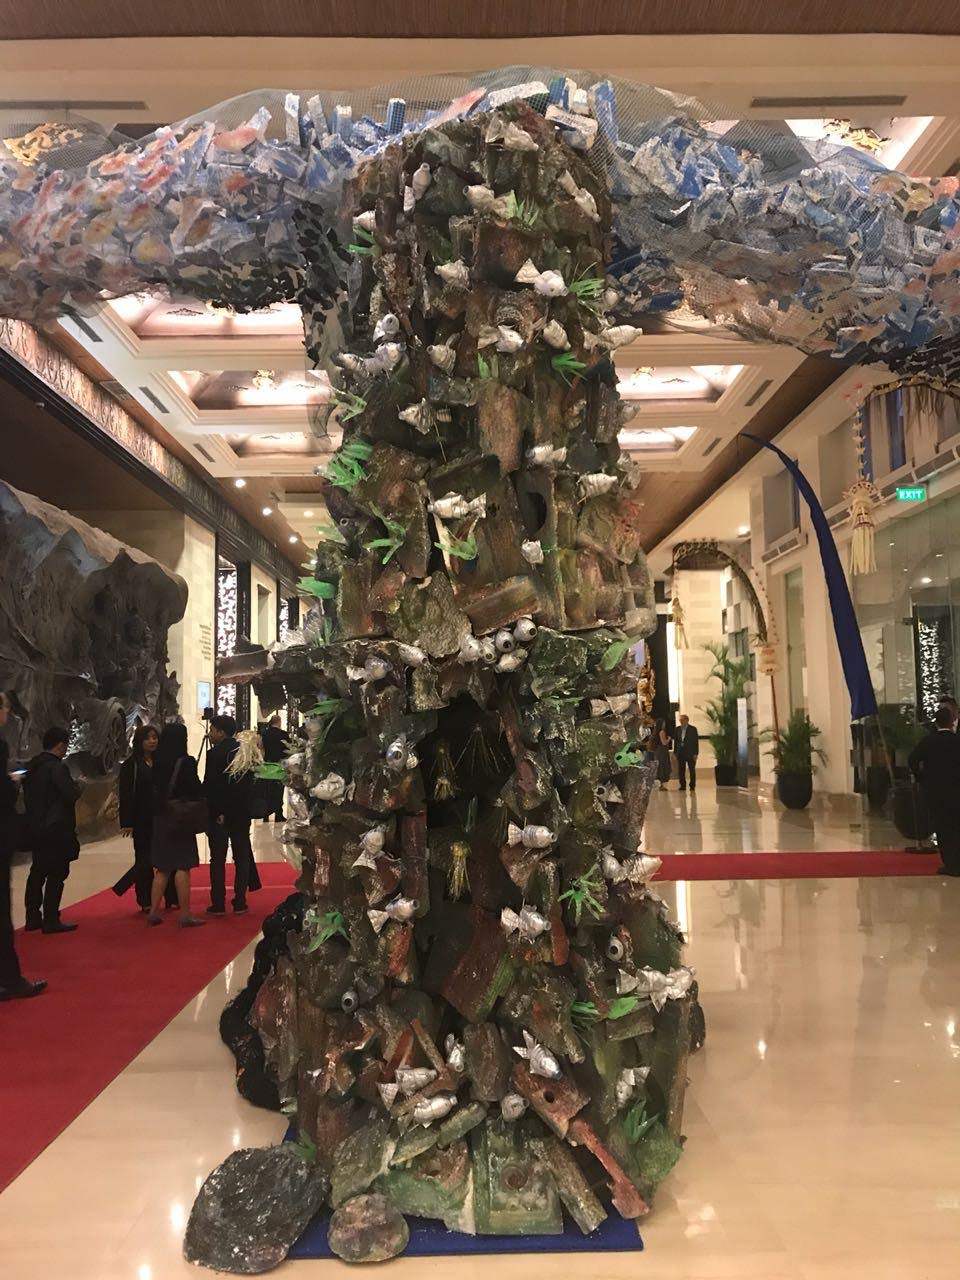  Sculptures crafted from plastic trash decorate the halls of Our Ocean 2018. 